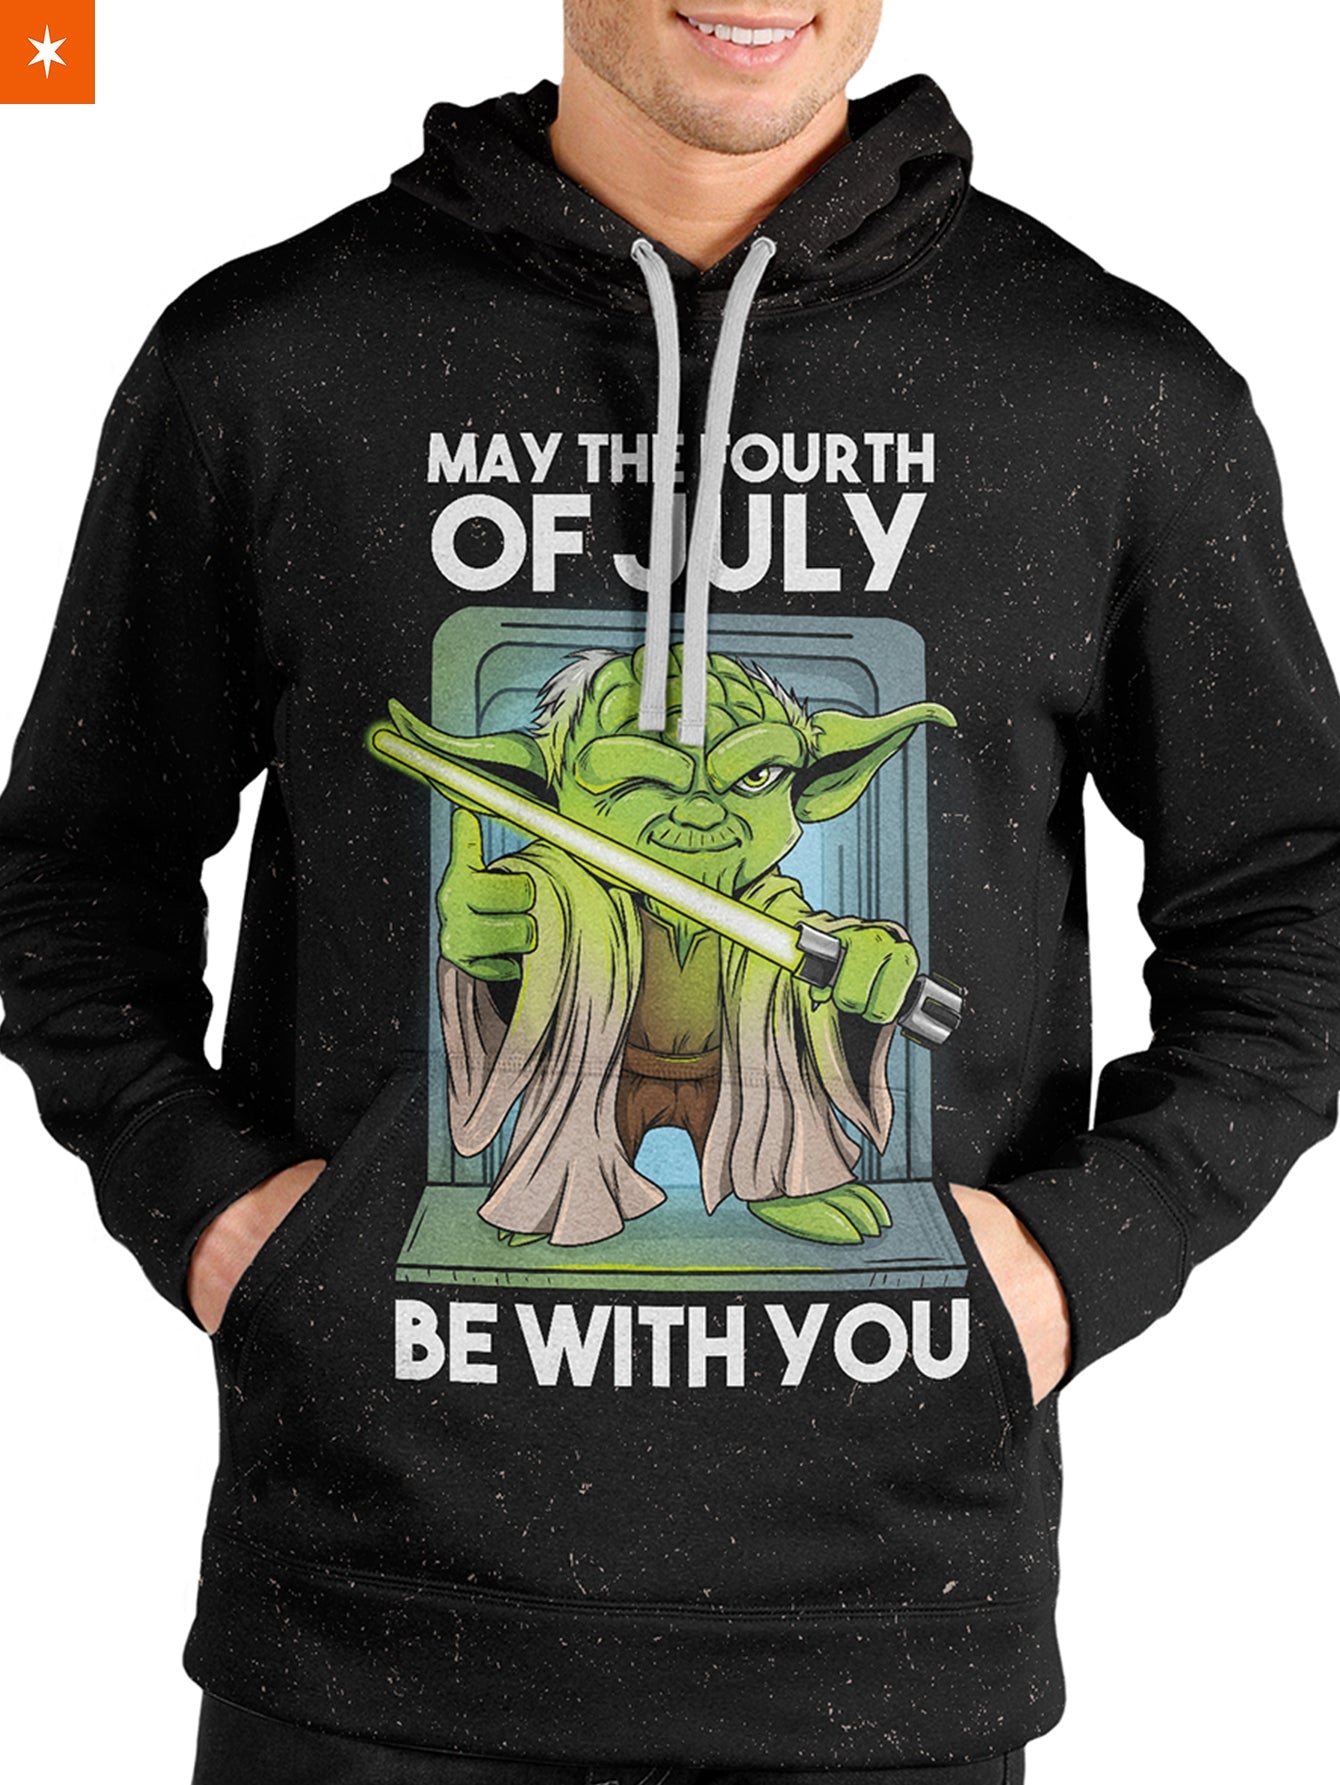 Fandomaniax - May the 4th of July be with you Unisex Pullover Hoodie